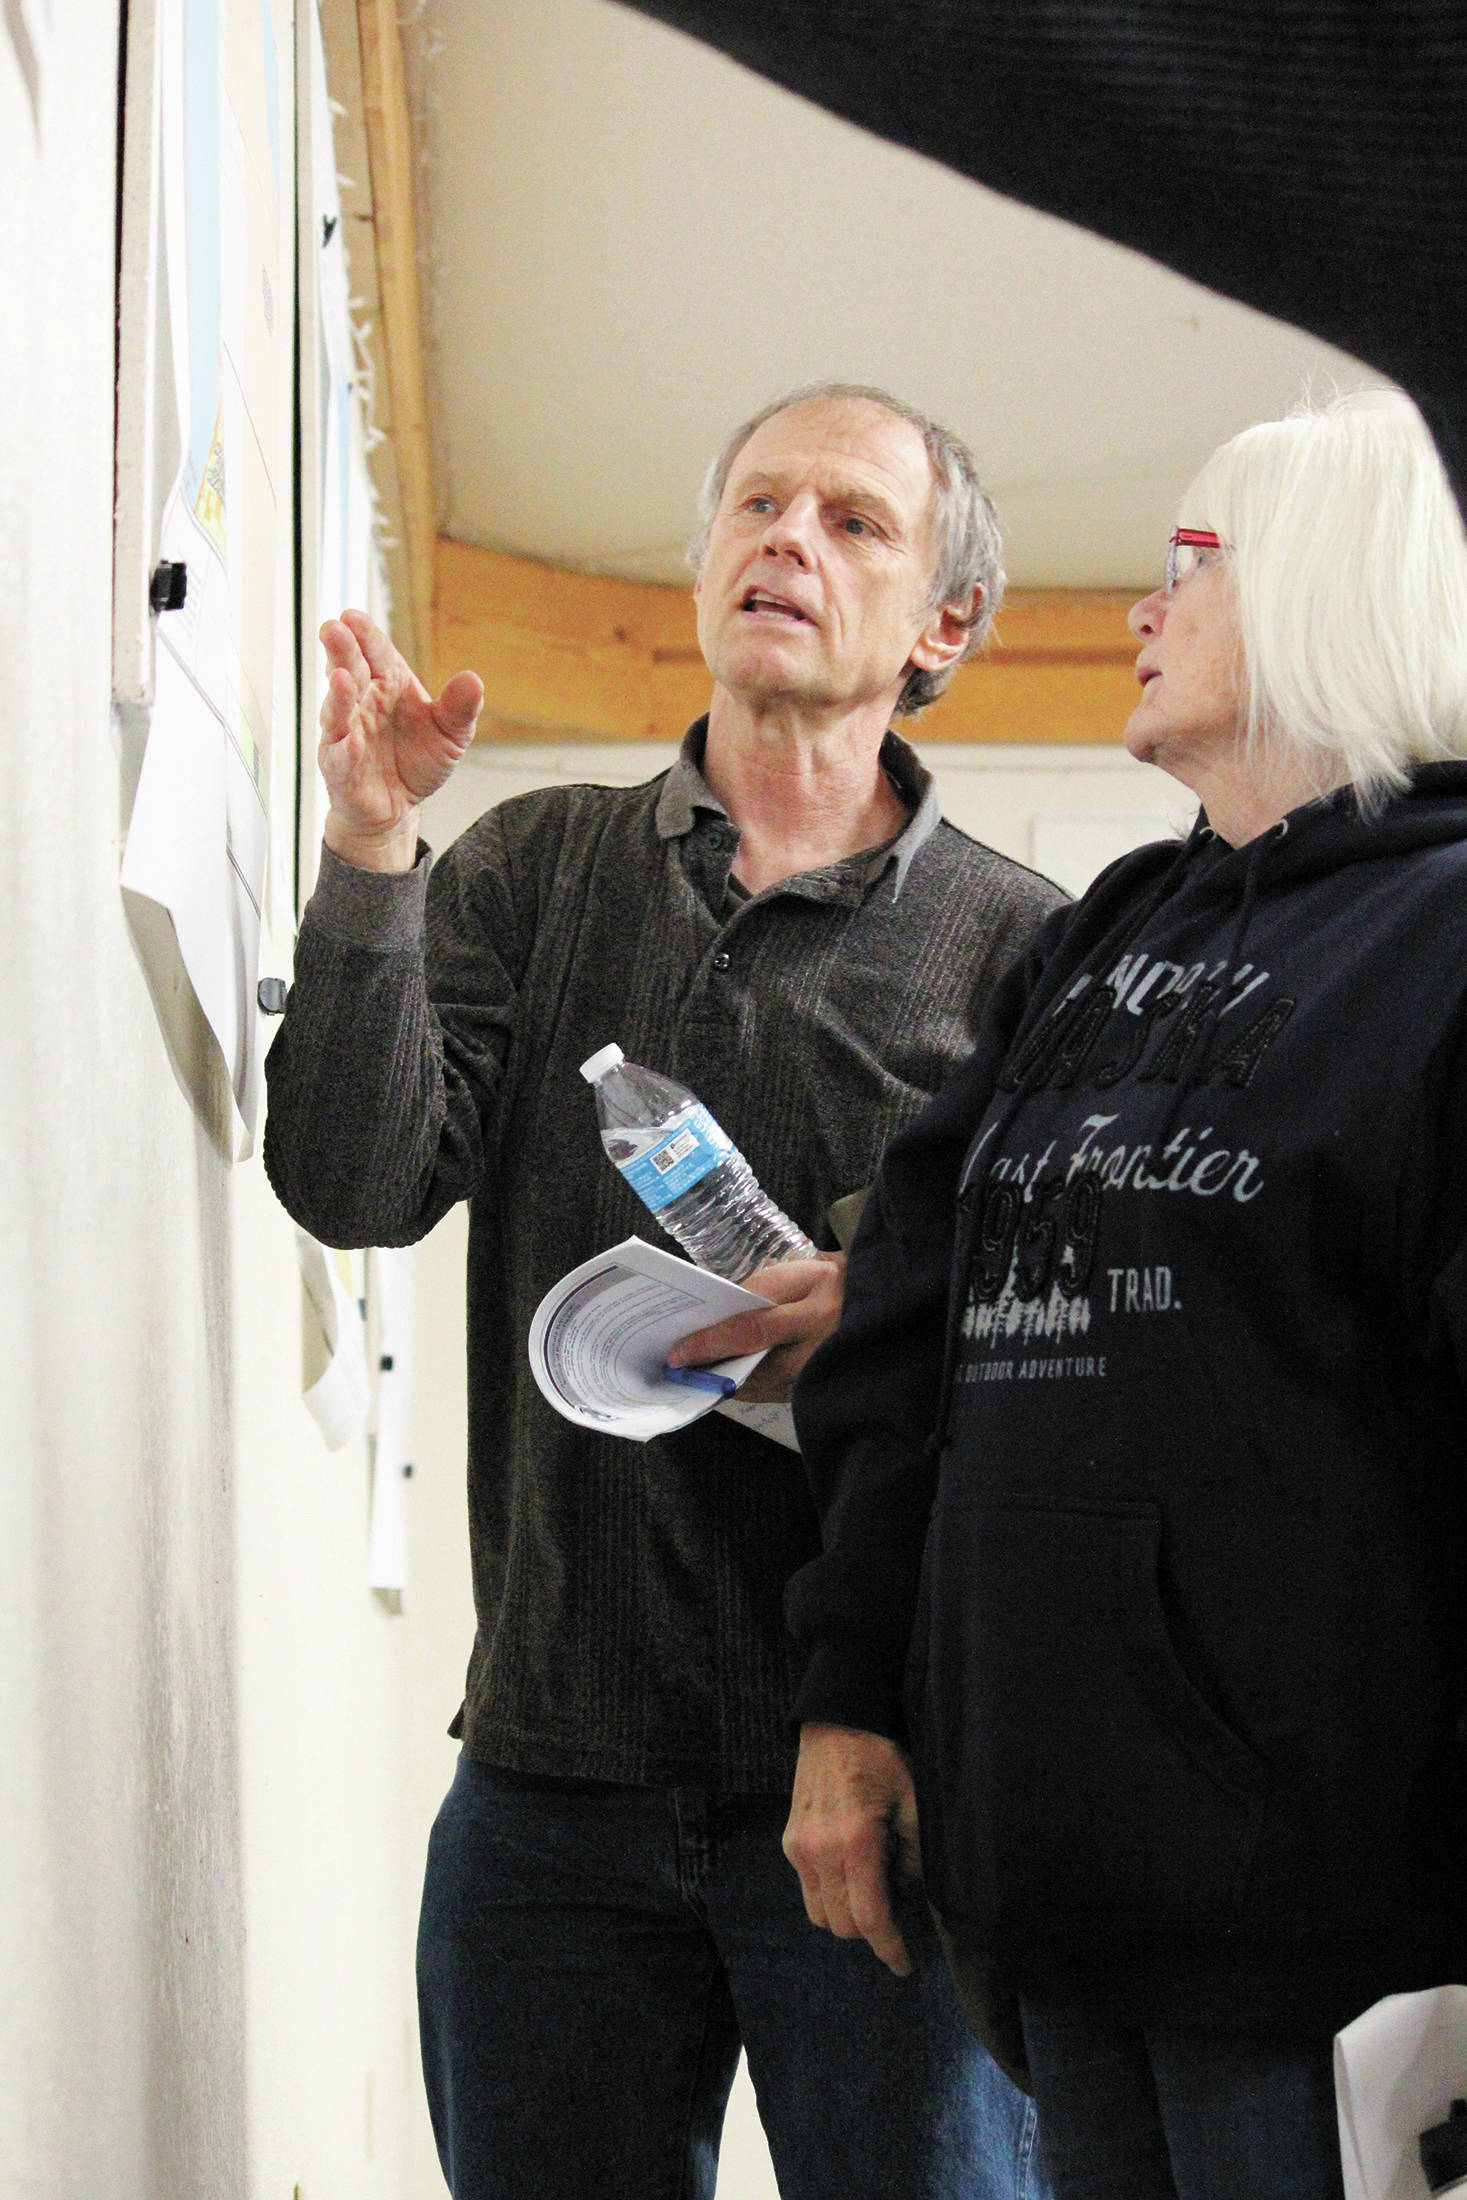 Kenai Peninsula Borough Assembly member Brent Johnson speaks with Ninilchik community member Nancy DePodesta about the proposed boundaries for a potential fire and EMS service area for the area at a borough public hearing held Monday, March 9, 2020 at the Kenai Peninsula Fairgrounds in Ninilchik, Alaska. (Photo by Megan Pacer/Homer News)